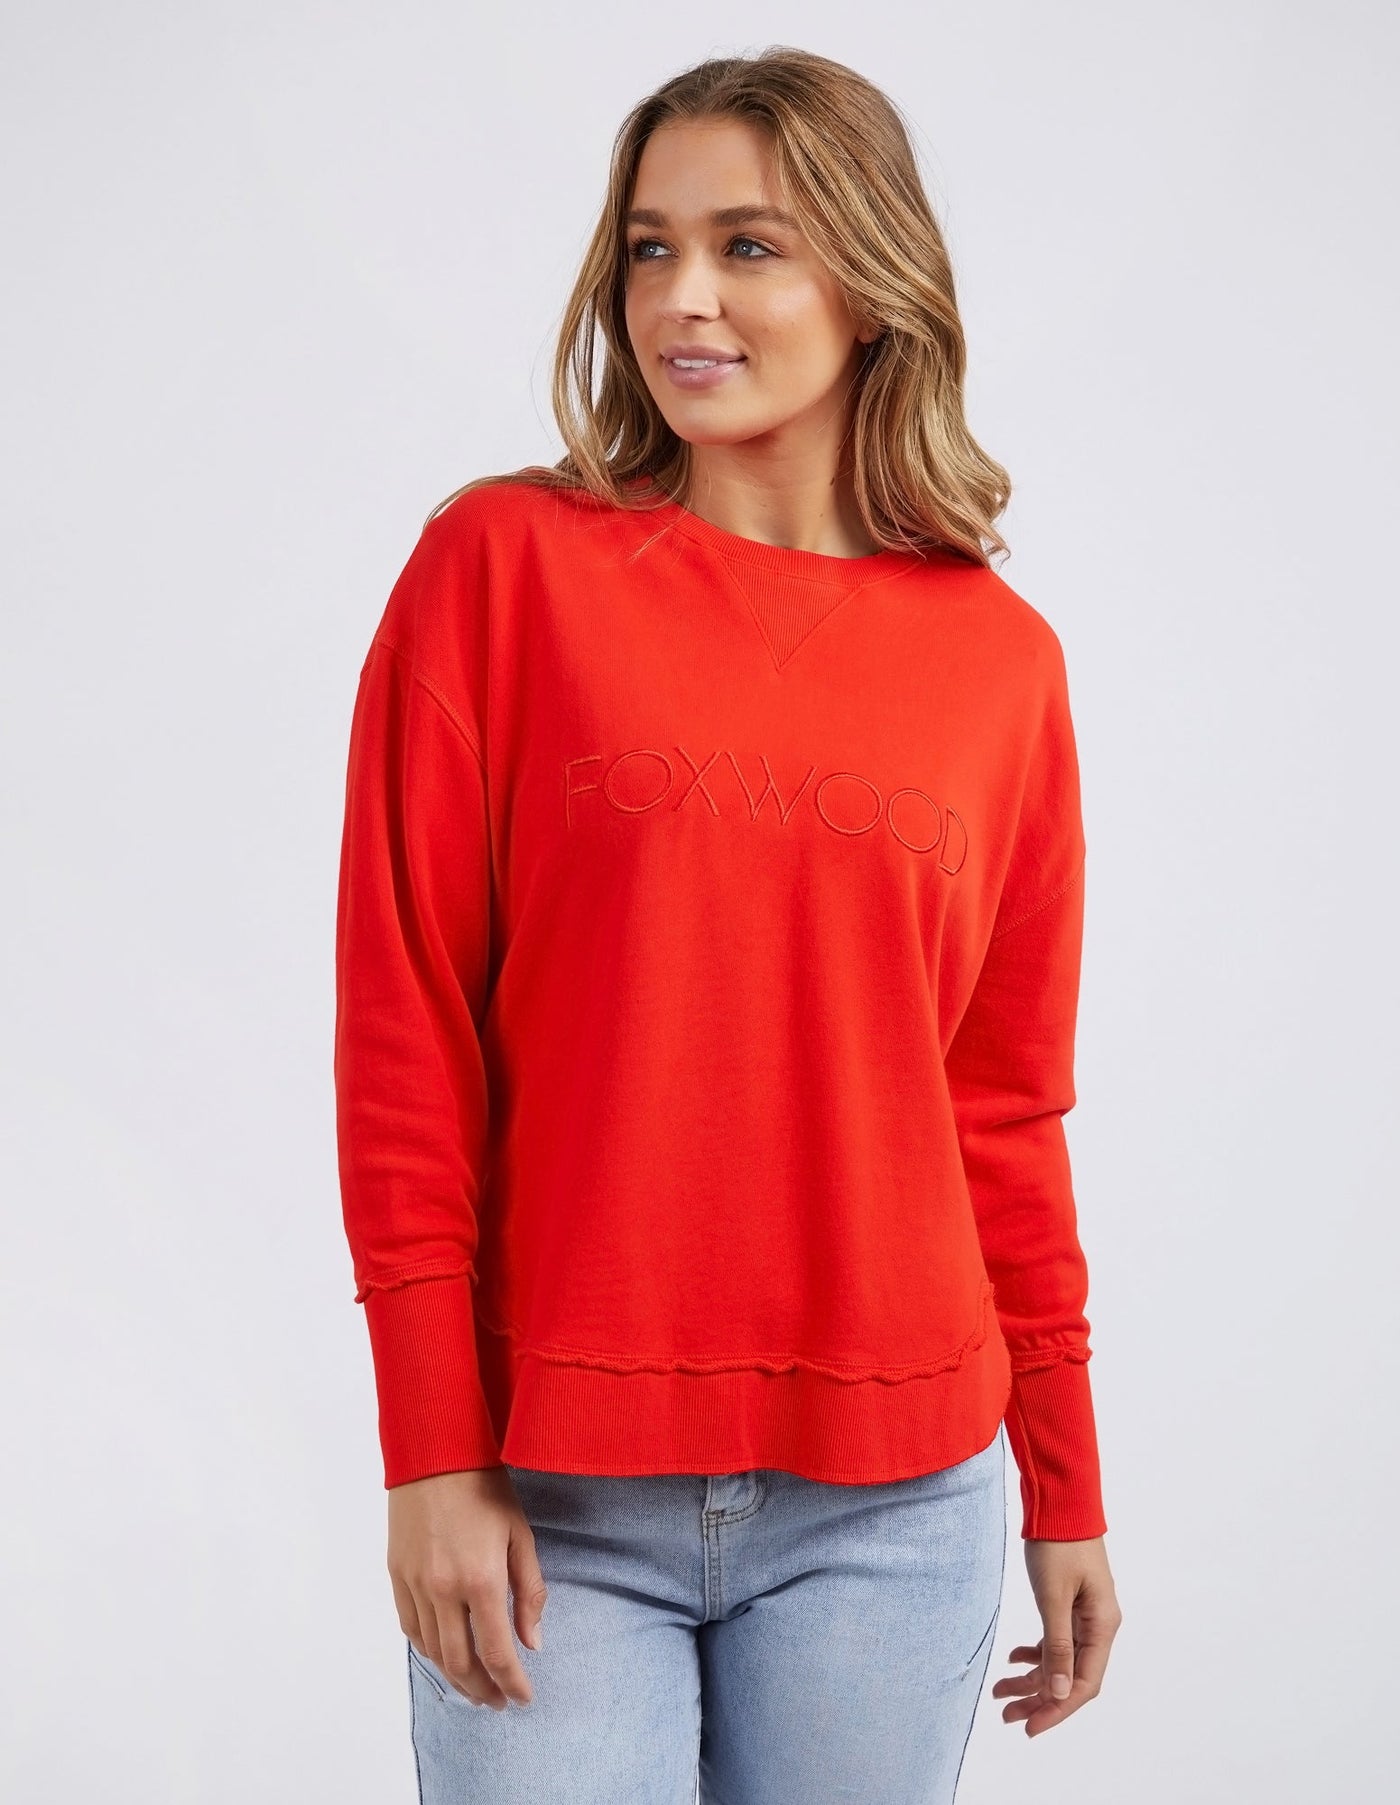 PRE-ORDER Simplified Crew - Bright Red-Foxwood-Lima & Co